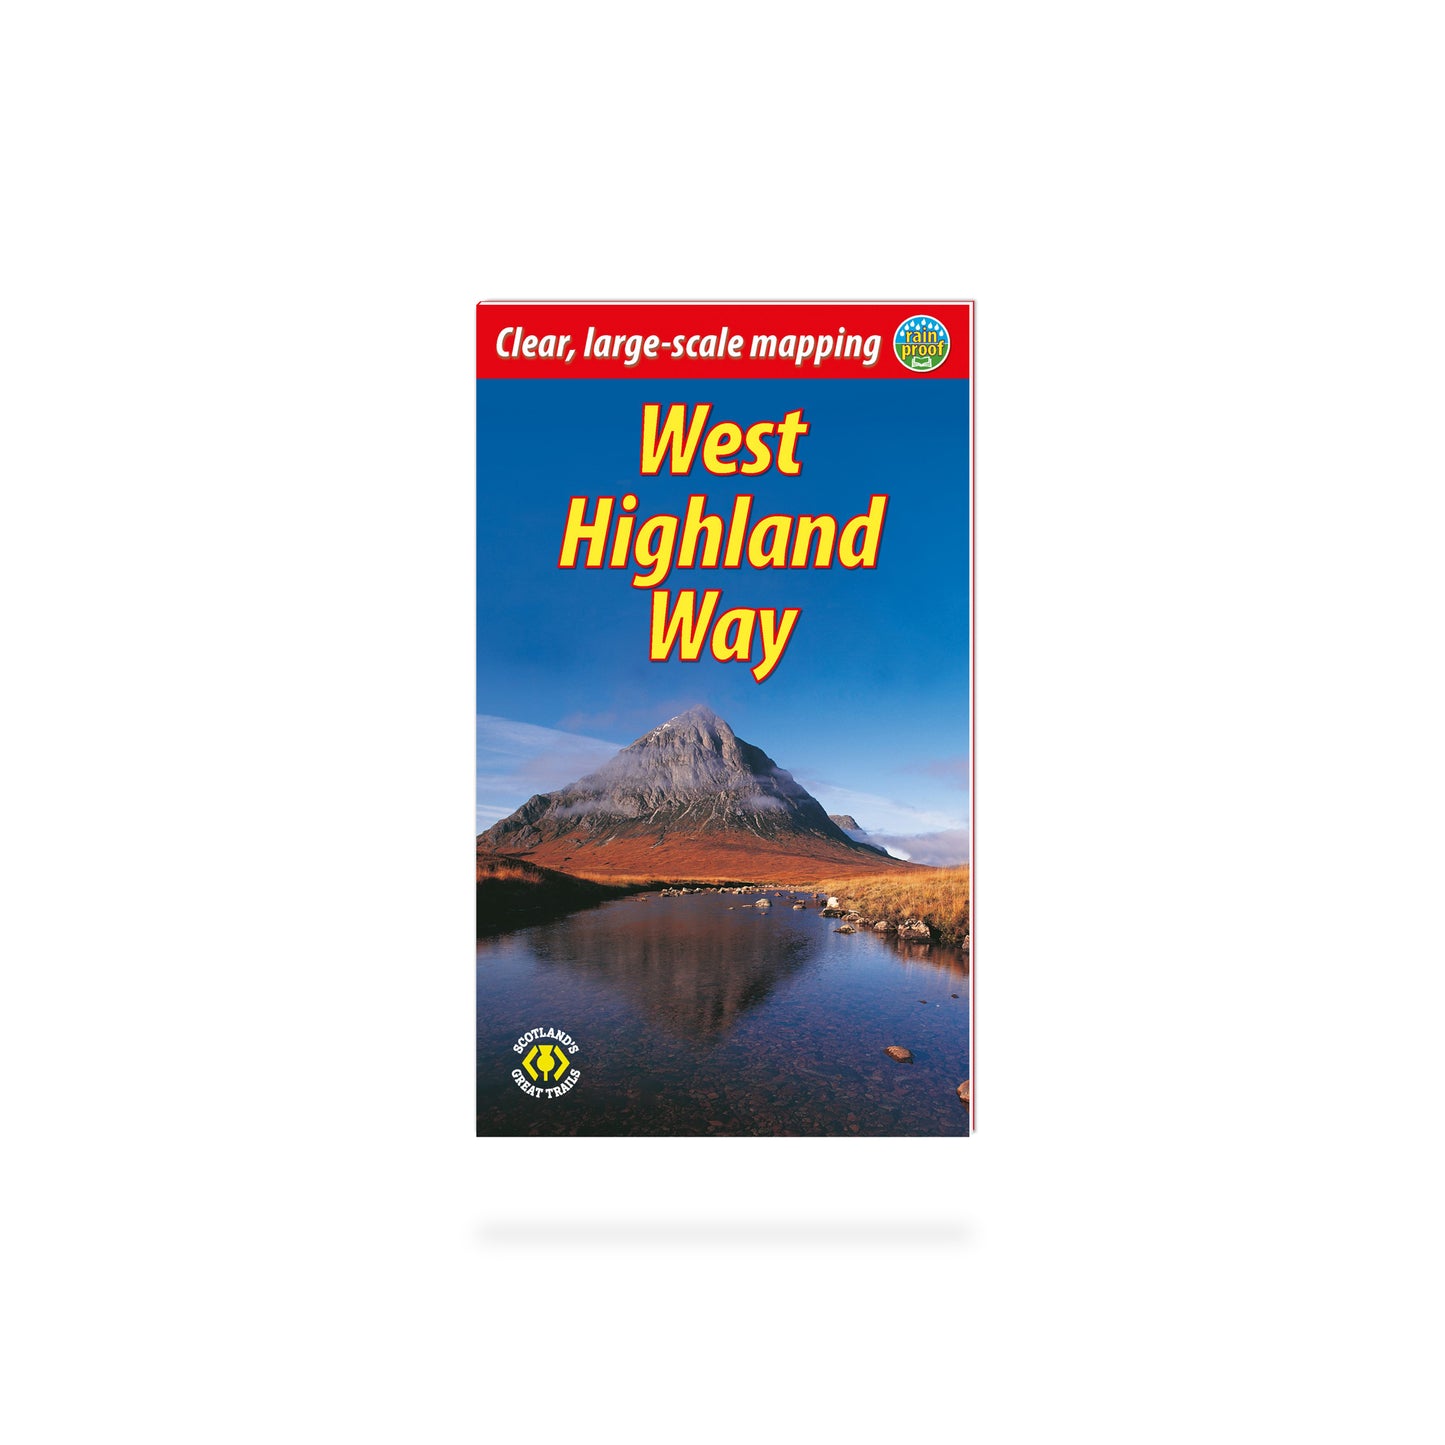 West Highland Way guide book